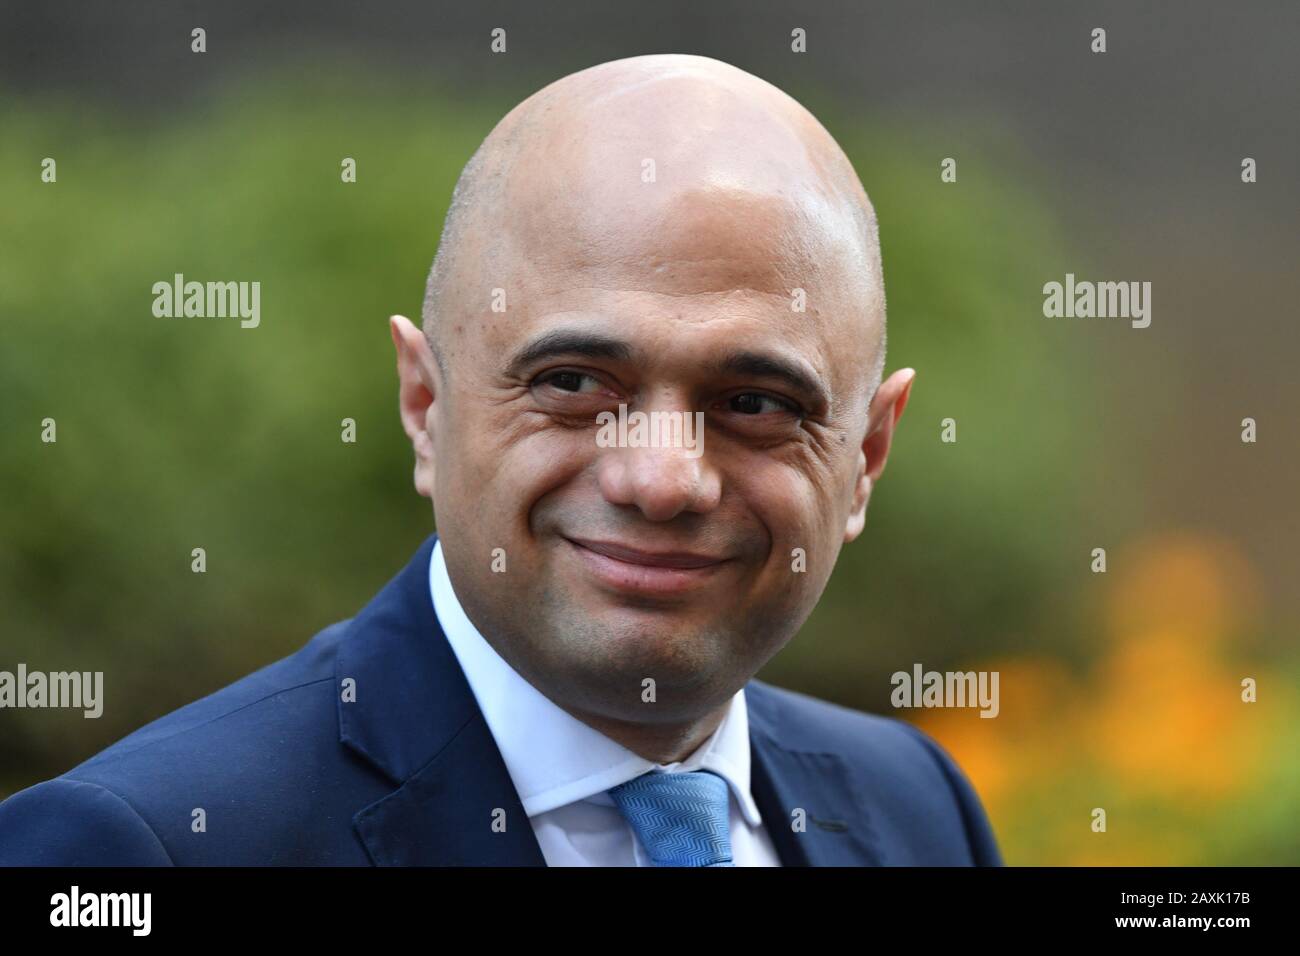 11 Downing Street, London, UK. 12th February 2020. Sajid Javid, Chancellor of the Exchequer, leaves 11 Downing Street minutes before the PM leaves No10 to attend weekly Prime Ministers Questions in Parliament. On 13th February (day following the photograph capture) Sajid Javid resigns as Chancellor during a Cabinet Reshuffle. Credit: Malcolm Park/Alamy Live News. Stock Photo